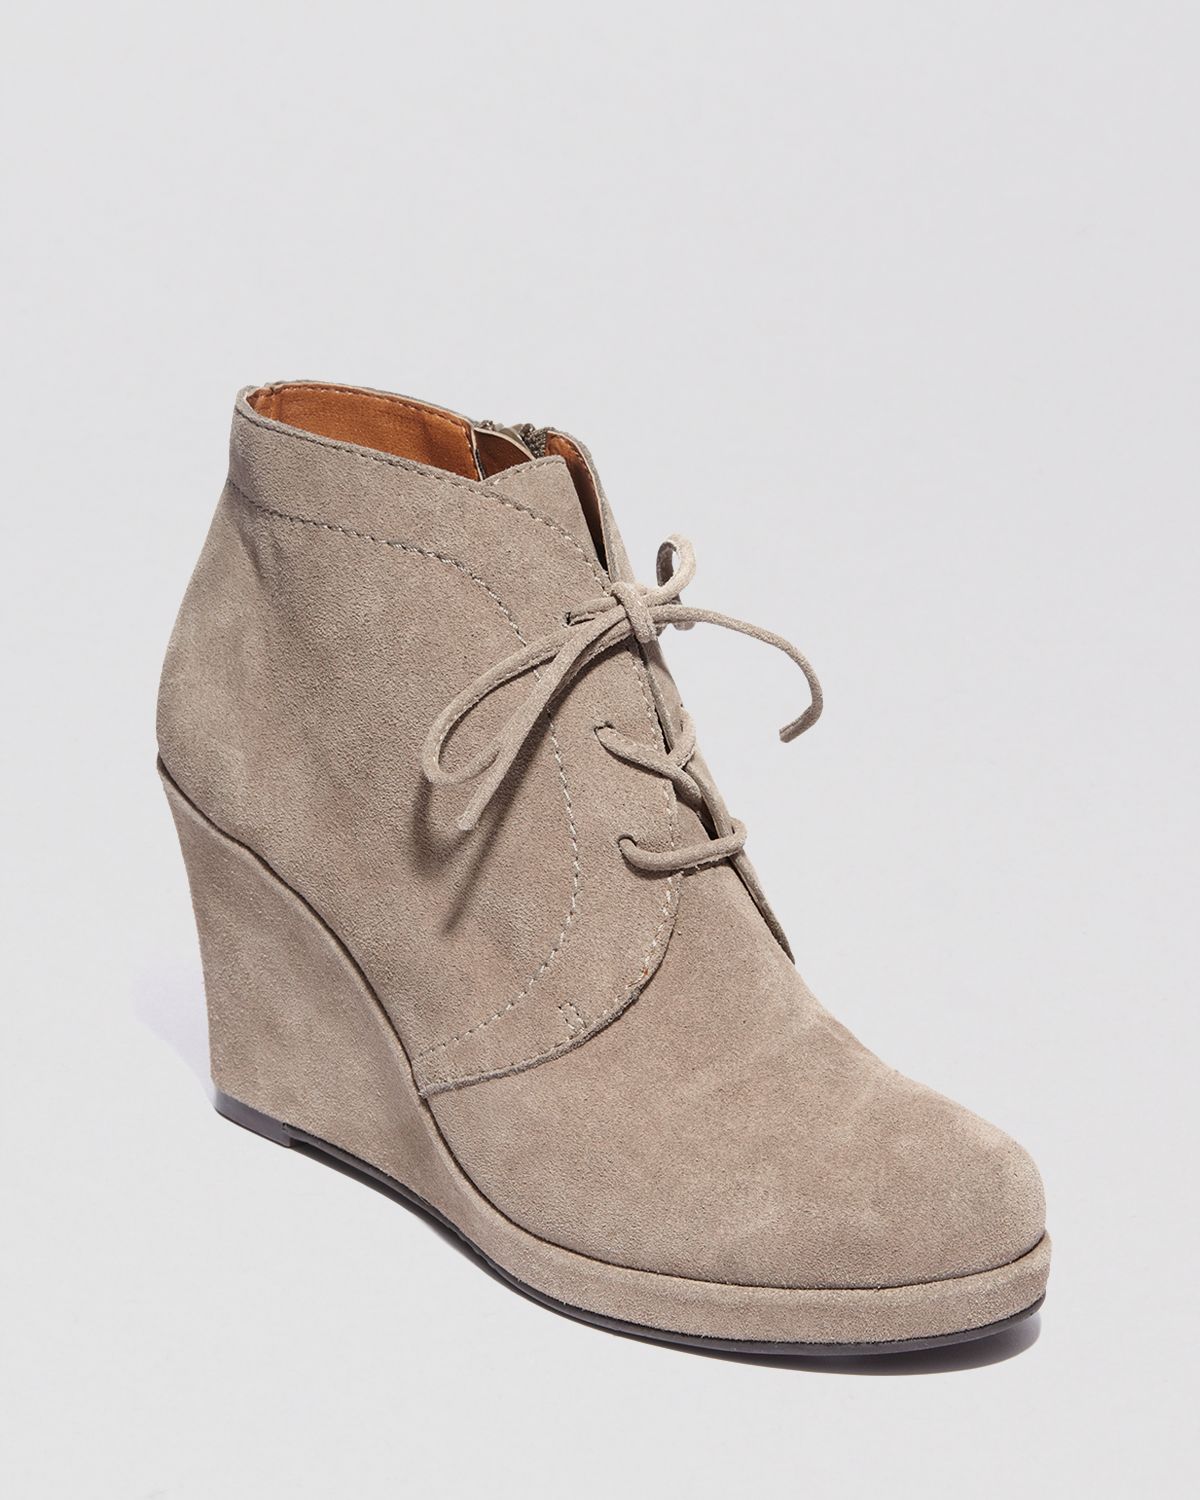 Dolce Vita Platform Lace Up Desert Booties Pace in Beige (Taupe) | Lyst